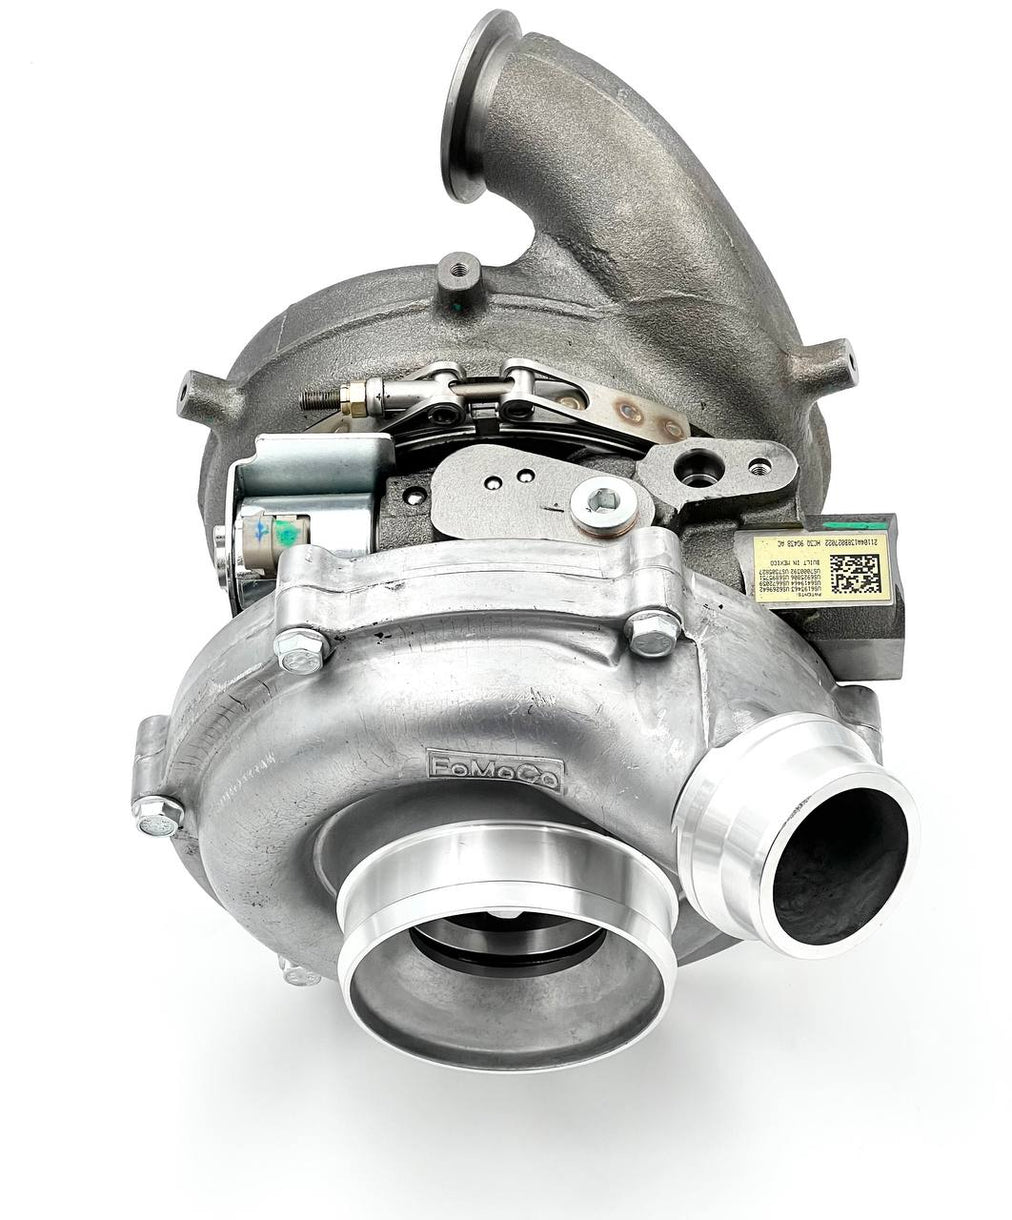 FC3Z6K682B | Genuine Ford® Turbocharger For 6.7L Ford F250 / F350SD